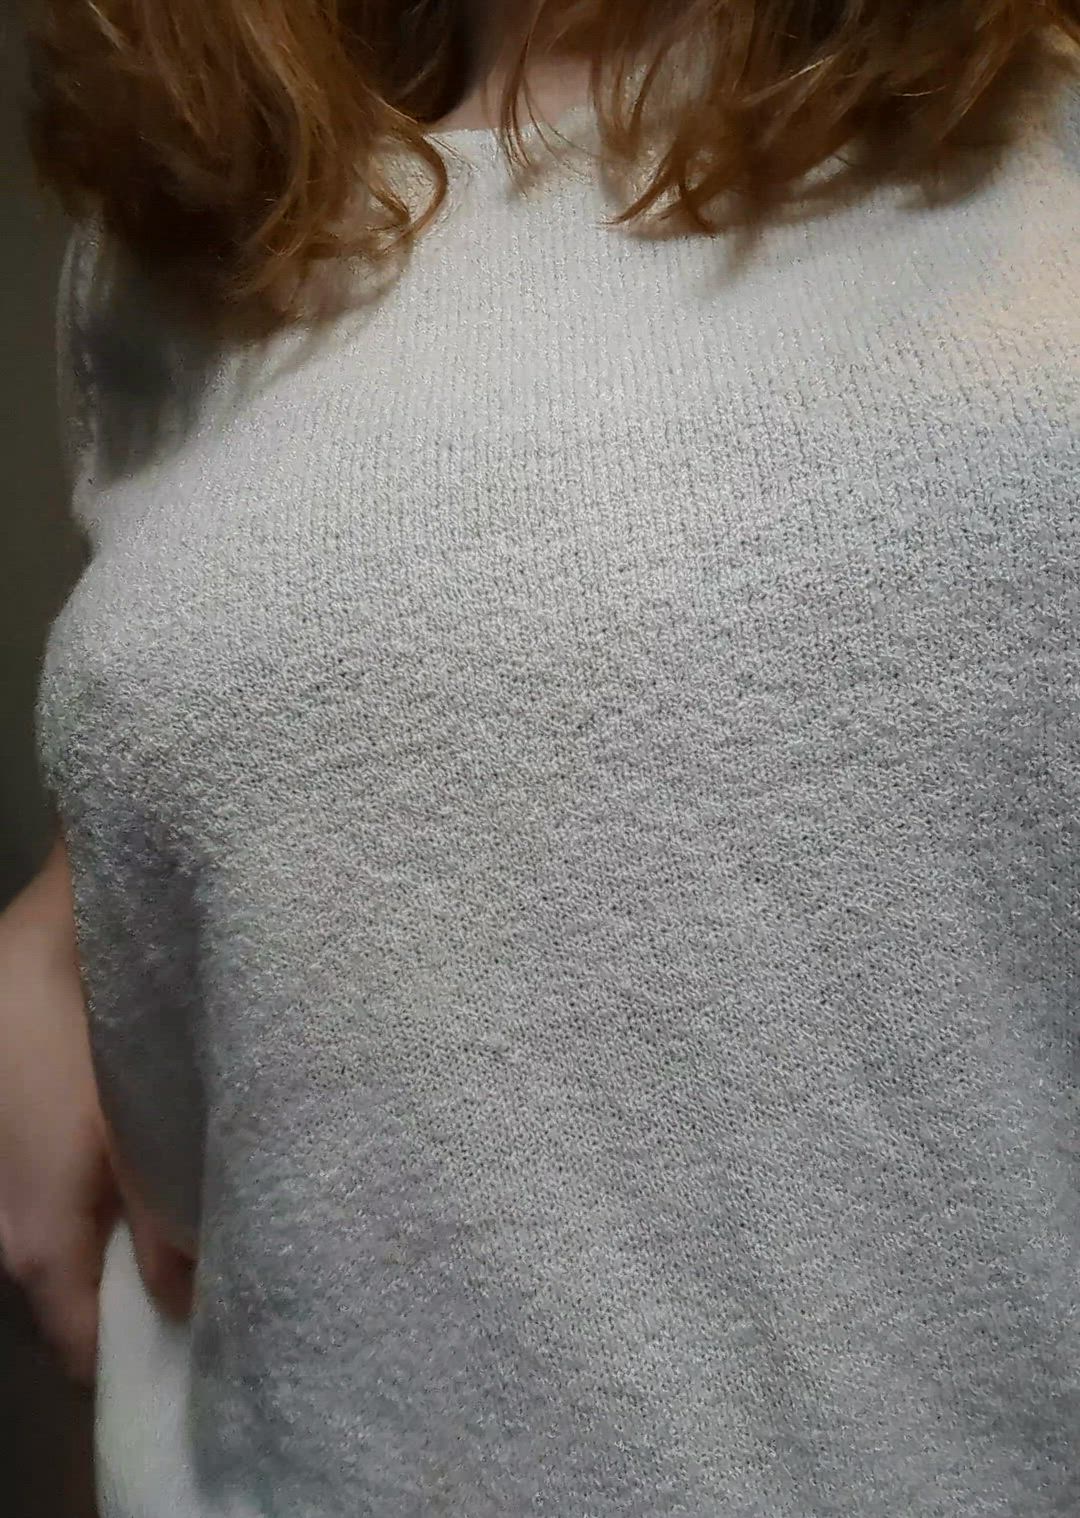 Tits porn video with onlyfans model frecklesandfelines <strong>@frecklesandfelines</strong>